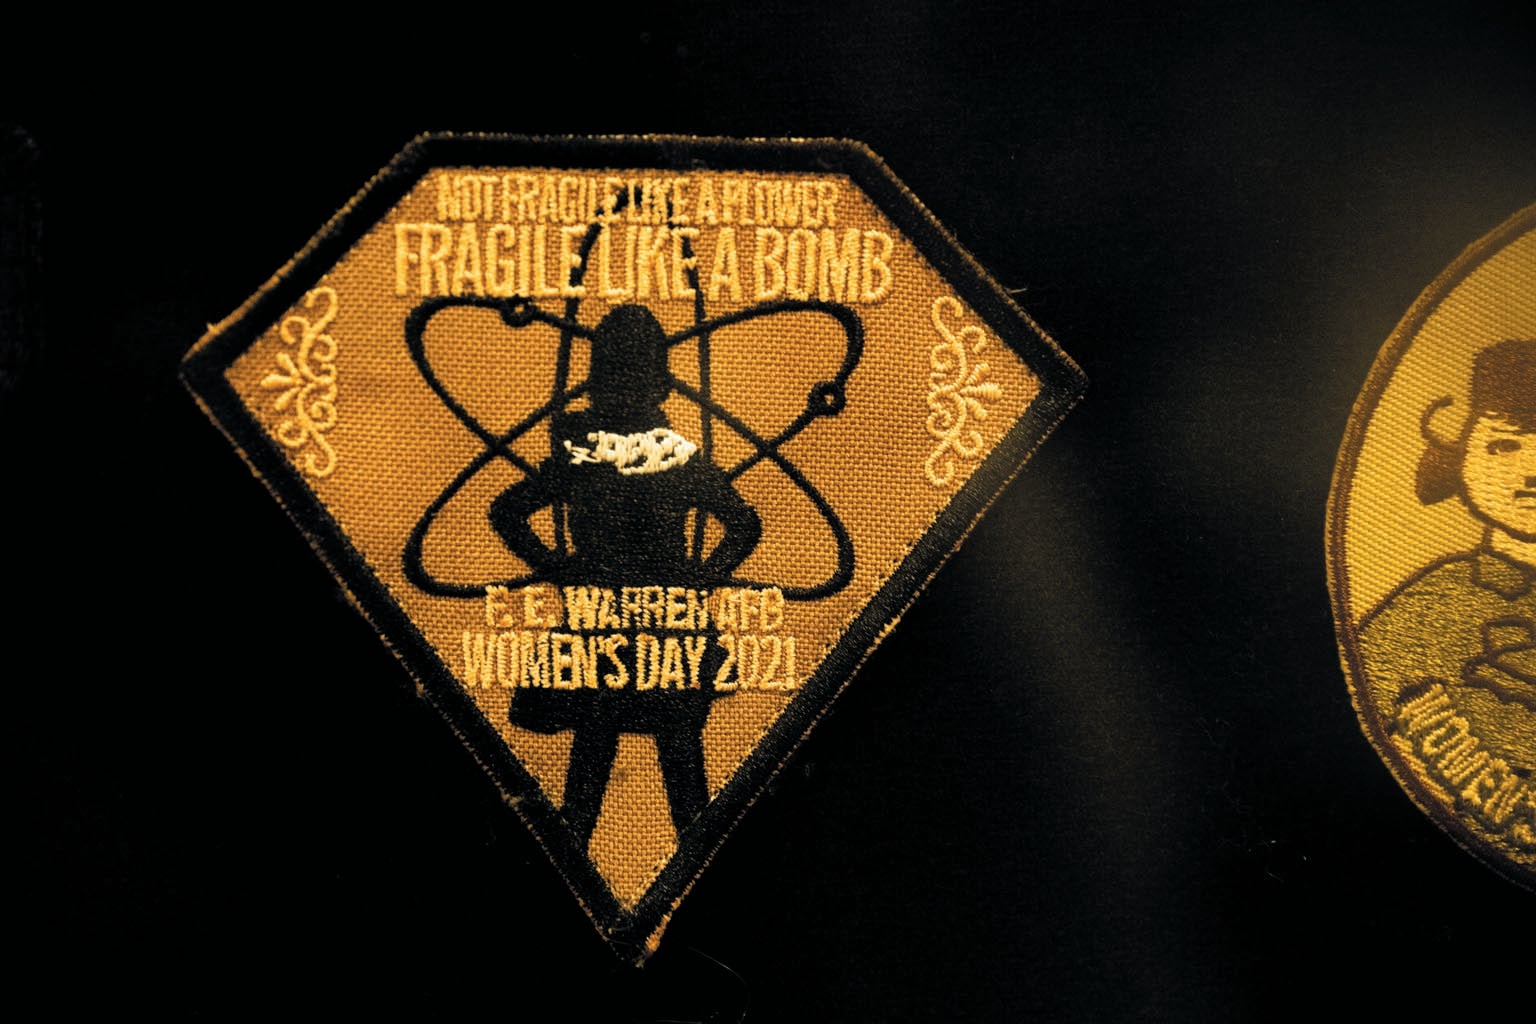 A patch showing the figure of a woman and the nuclear symbol.